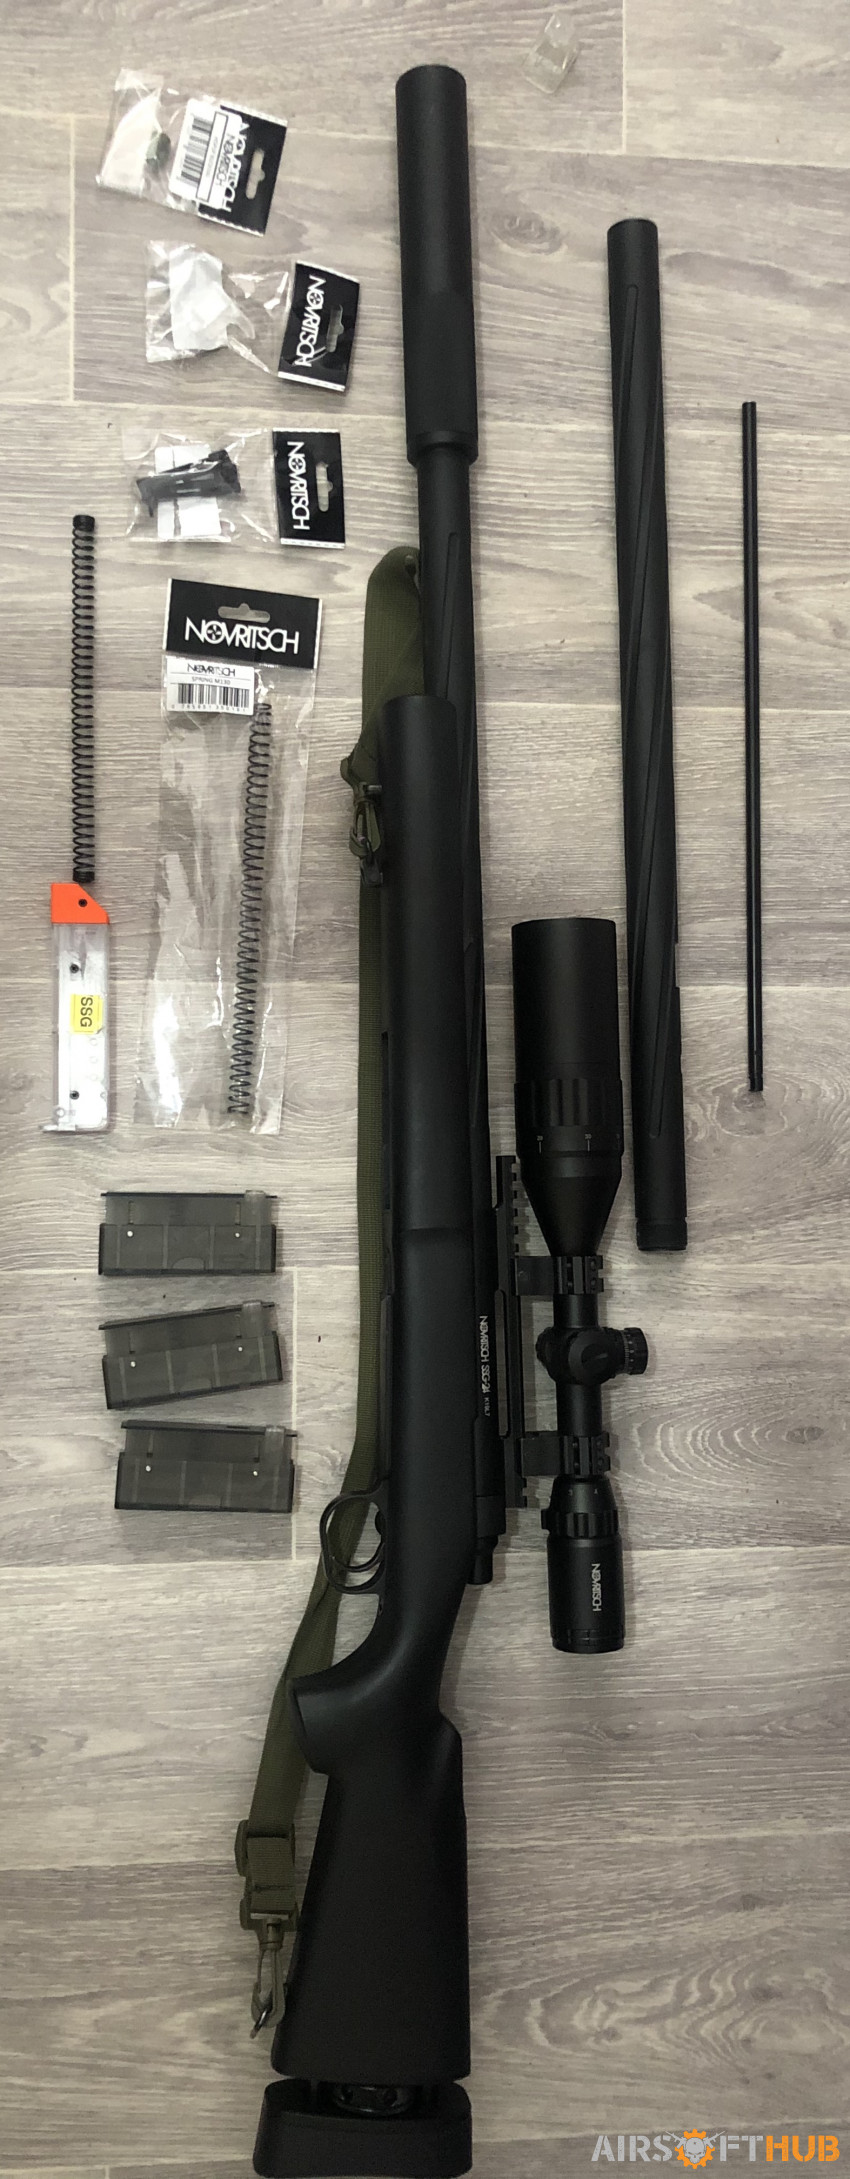 SSG24 Bundle - Used airsoft equipment